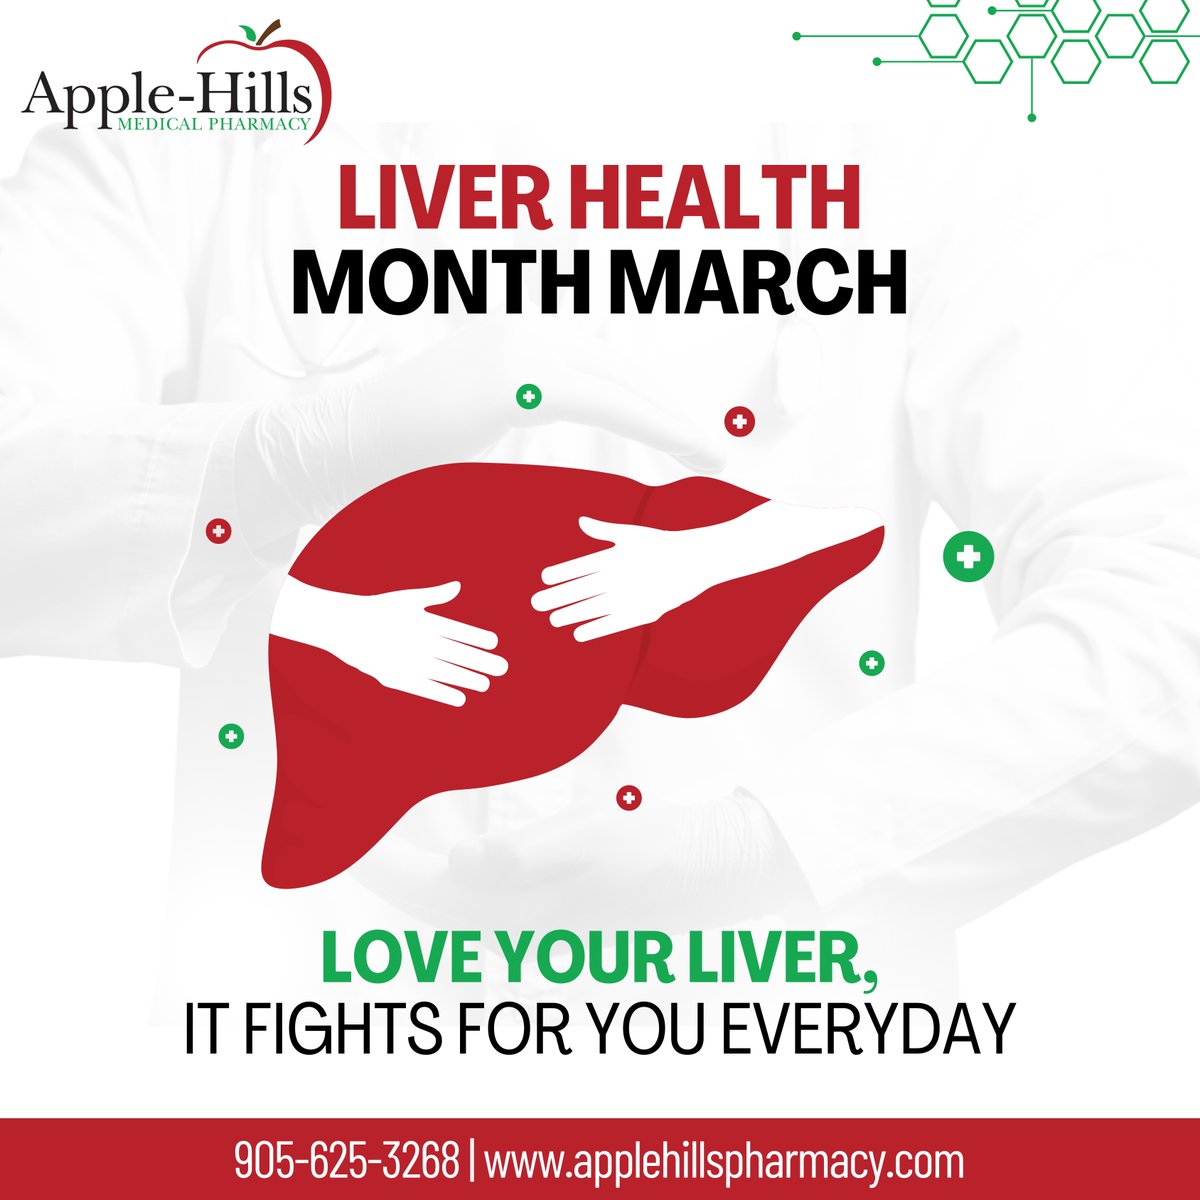 'Did you know that liver disease is the 5th leading cause of death in adults over 
the age of 65? Take care of yours with these simple 

#livermonth #marchmonth #disease #balanceddiet #healthy #weight #exercise #diet #applehillspharmacy #mississauga